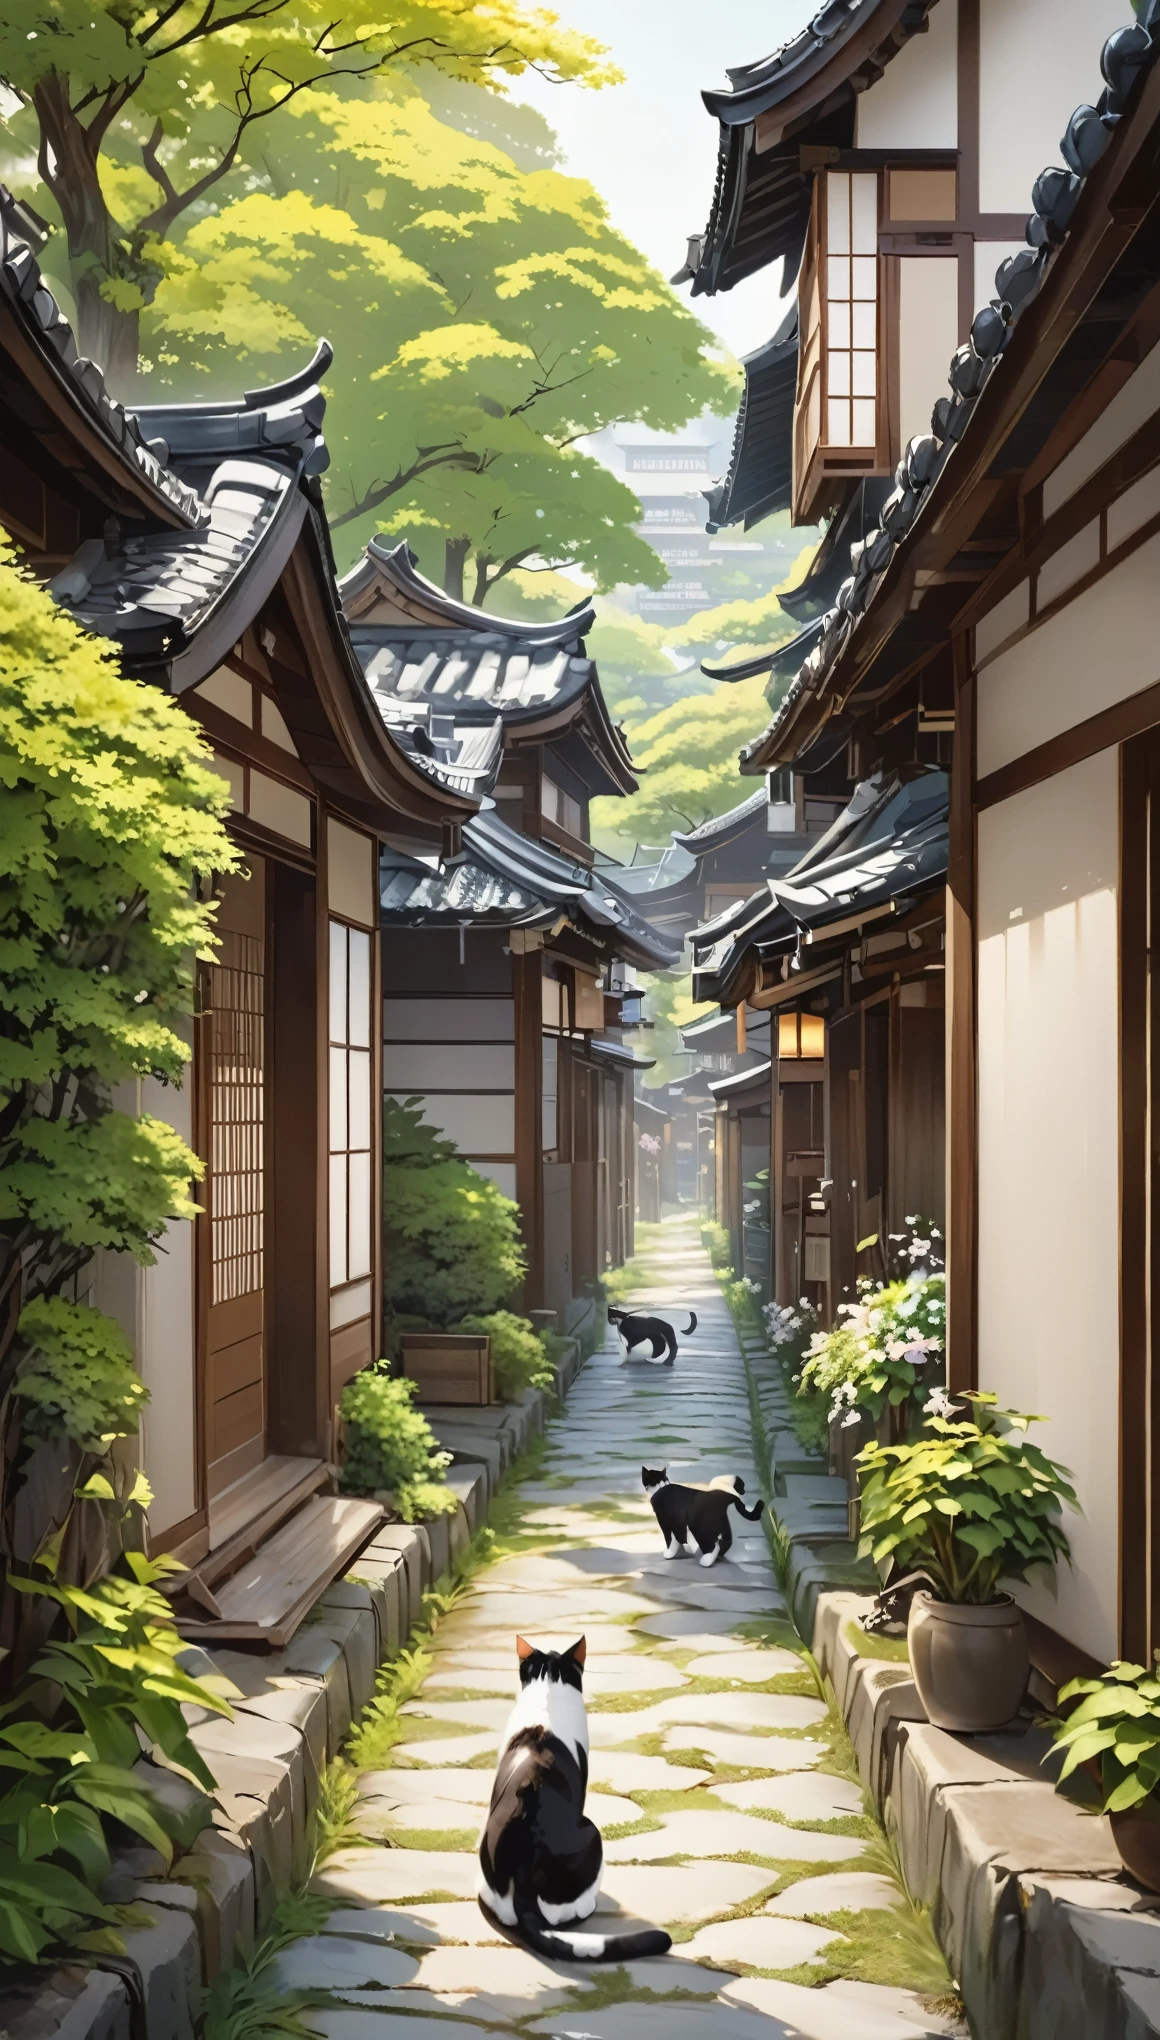 Long Shot、The subject is small、Three-haired cat、、Three-haired cat strolling around as if it owns the place、Three-haired cat walking on the promenade、Old Japan cityscape、Plant-lined path、Different world、Create silence、